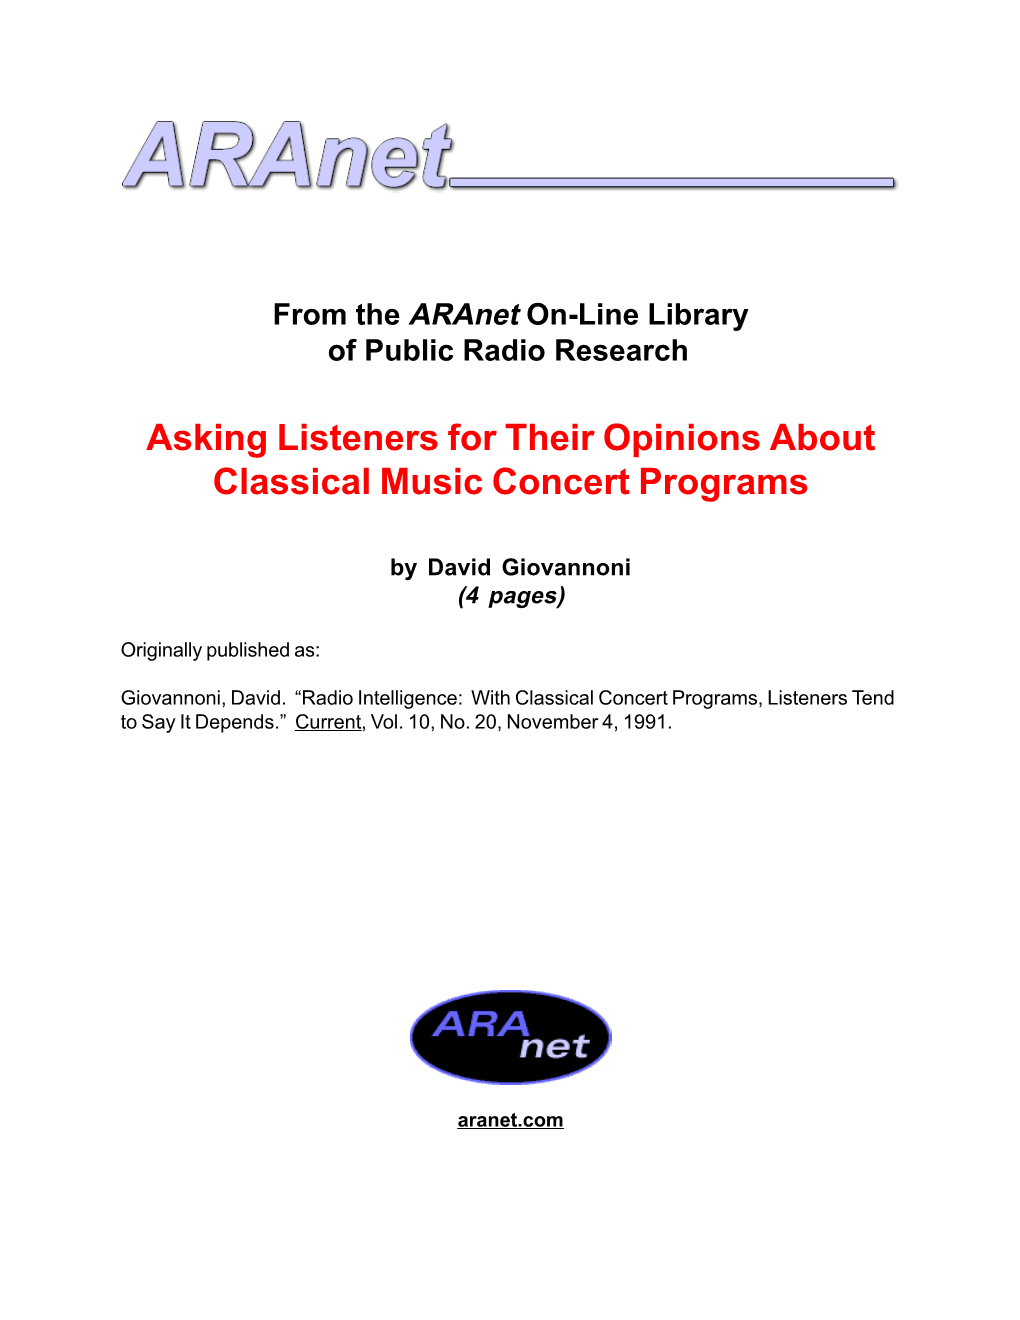 With Classical Concert Programs, Listeners Tend to Say It Depends.” Current, Vol